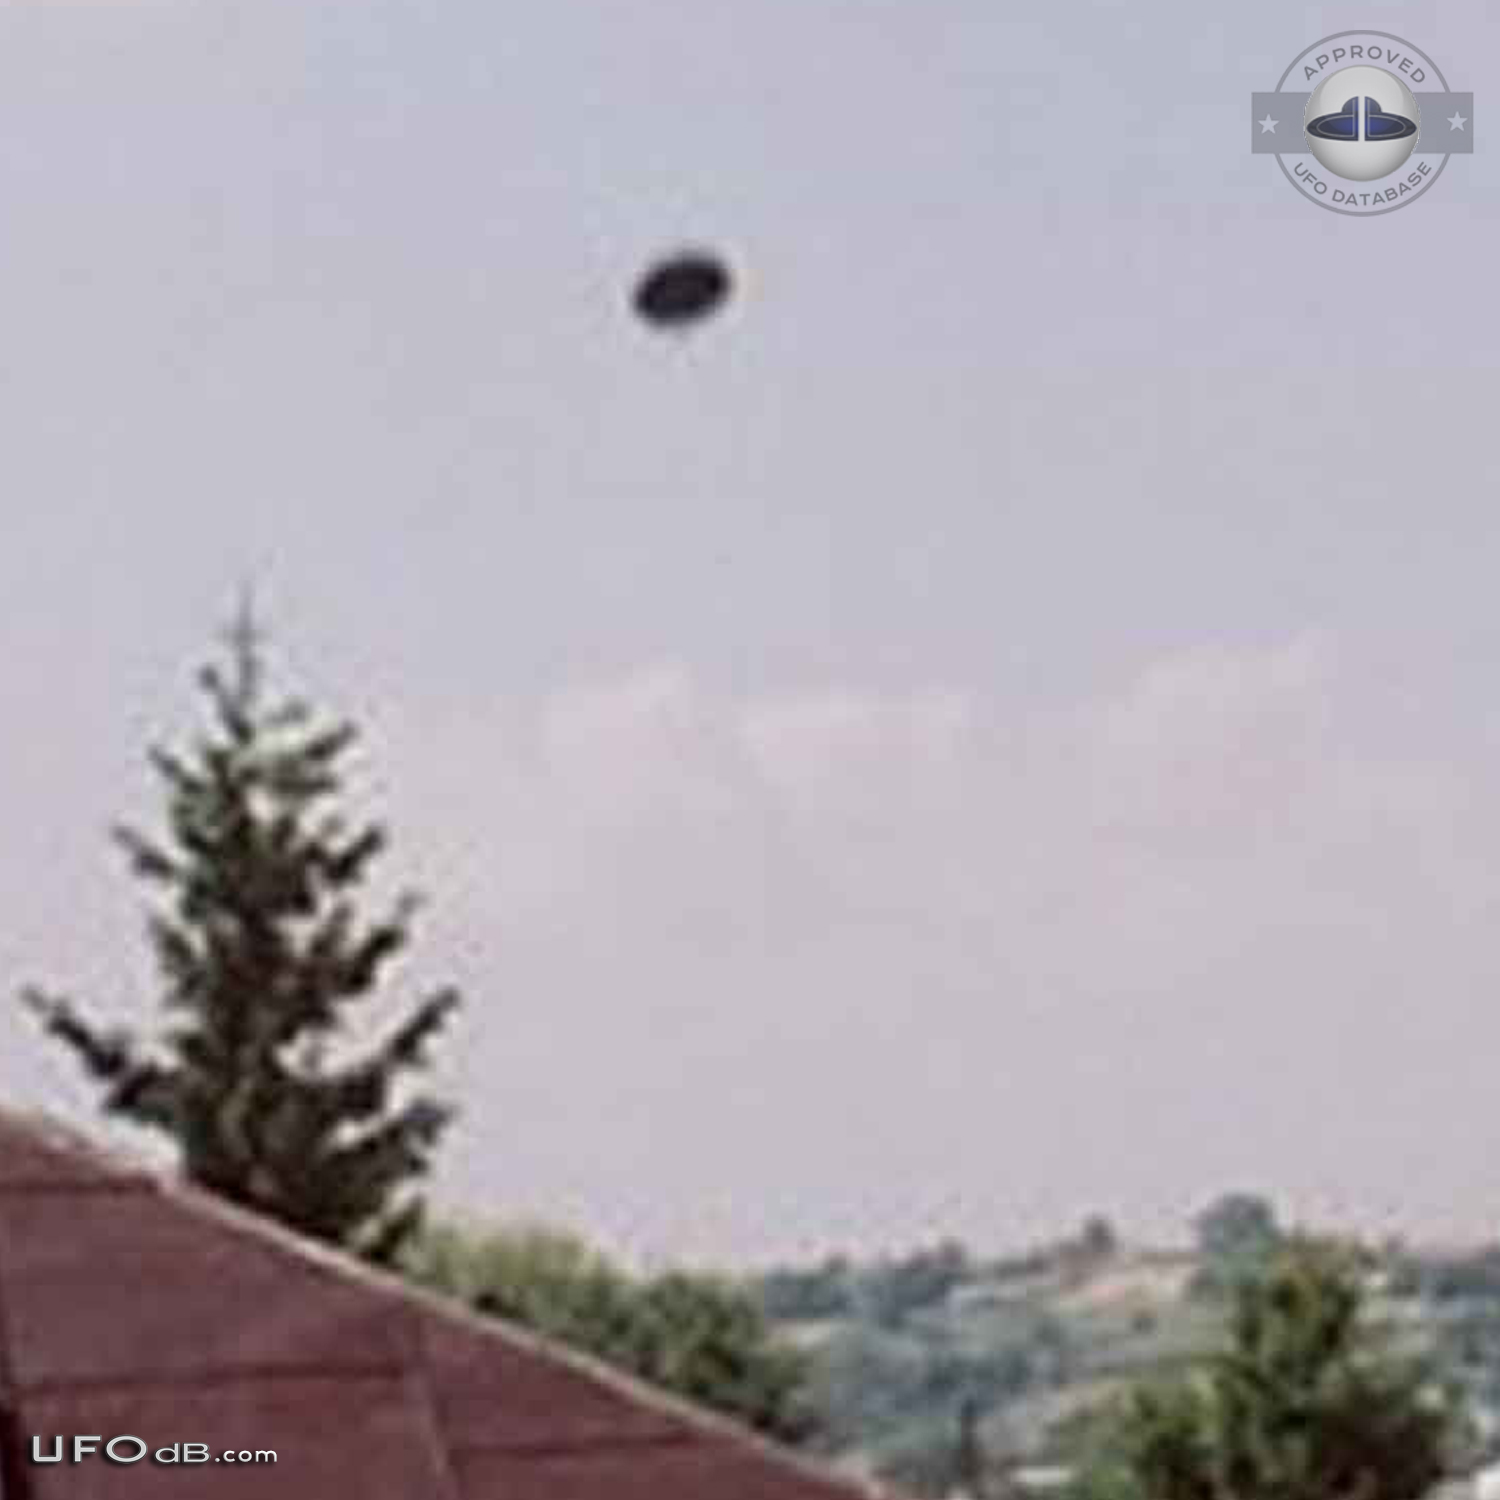 Poland 2003 Ufo sighting get aircrafts dispatched to check out the ufo UFO Picture #379-2